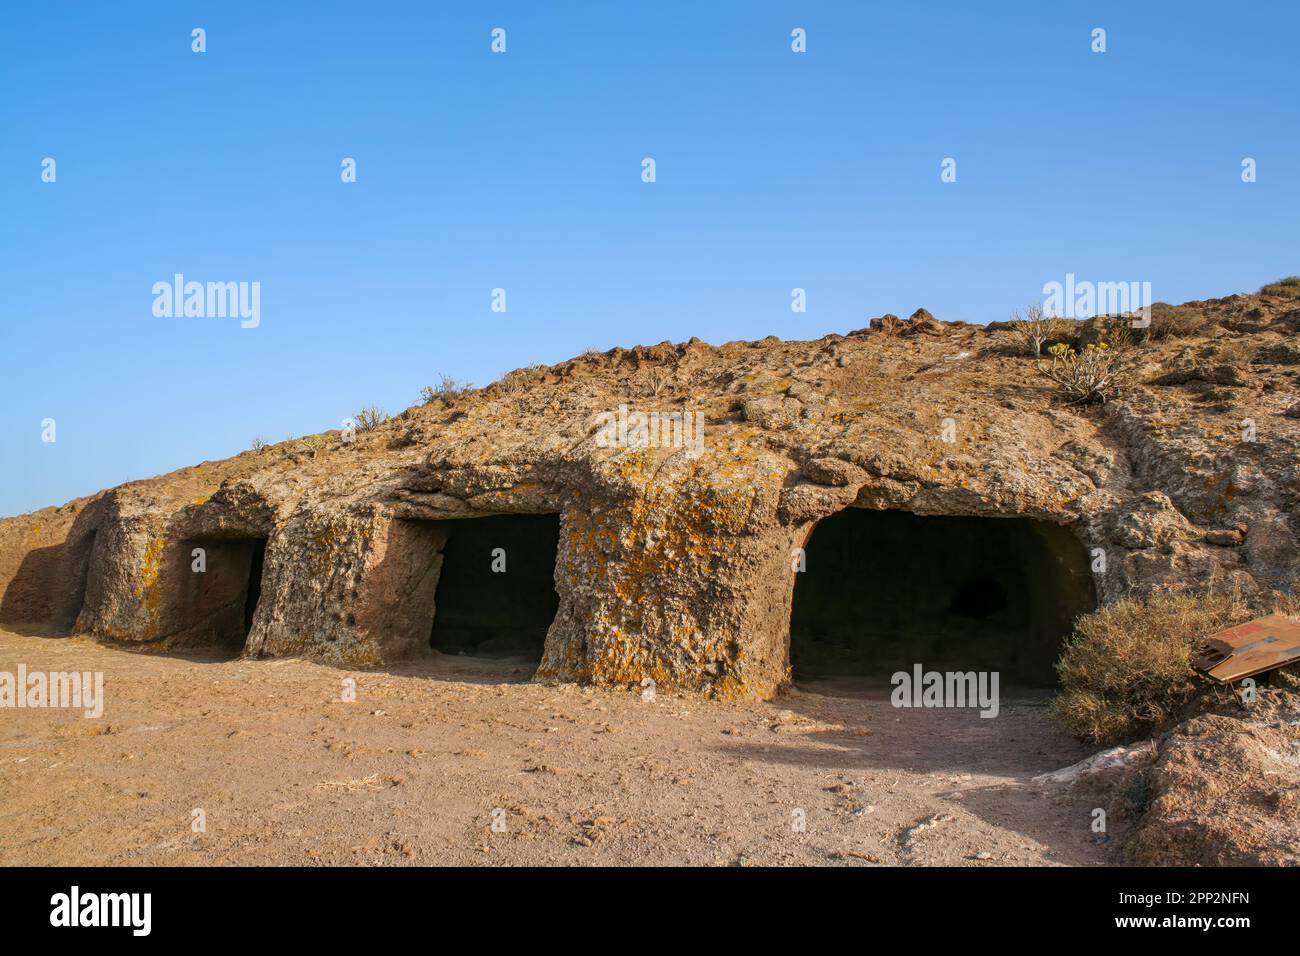 Cueva de Cuatro Puertas, caves with four gates, former dwelling place and place of worship of the indigenous Guanches, Gran Canaria, Canary Islands, S Stock Photo